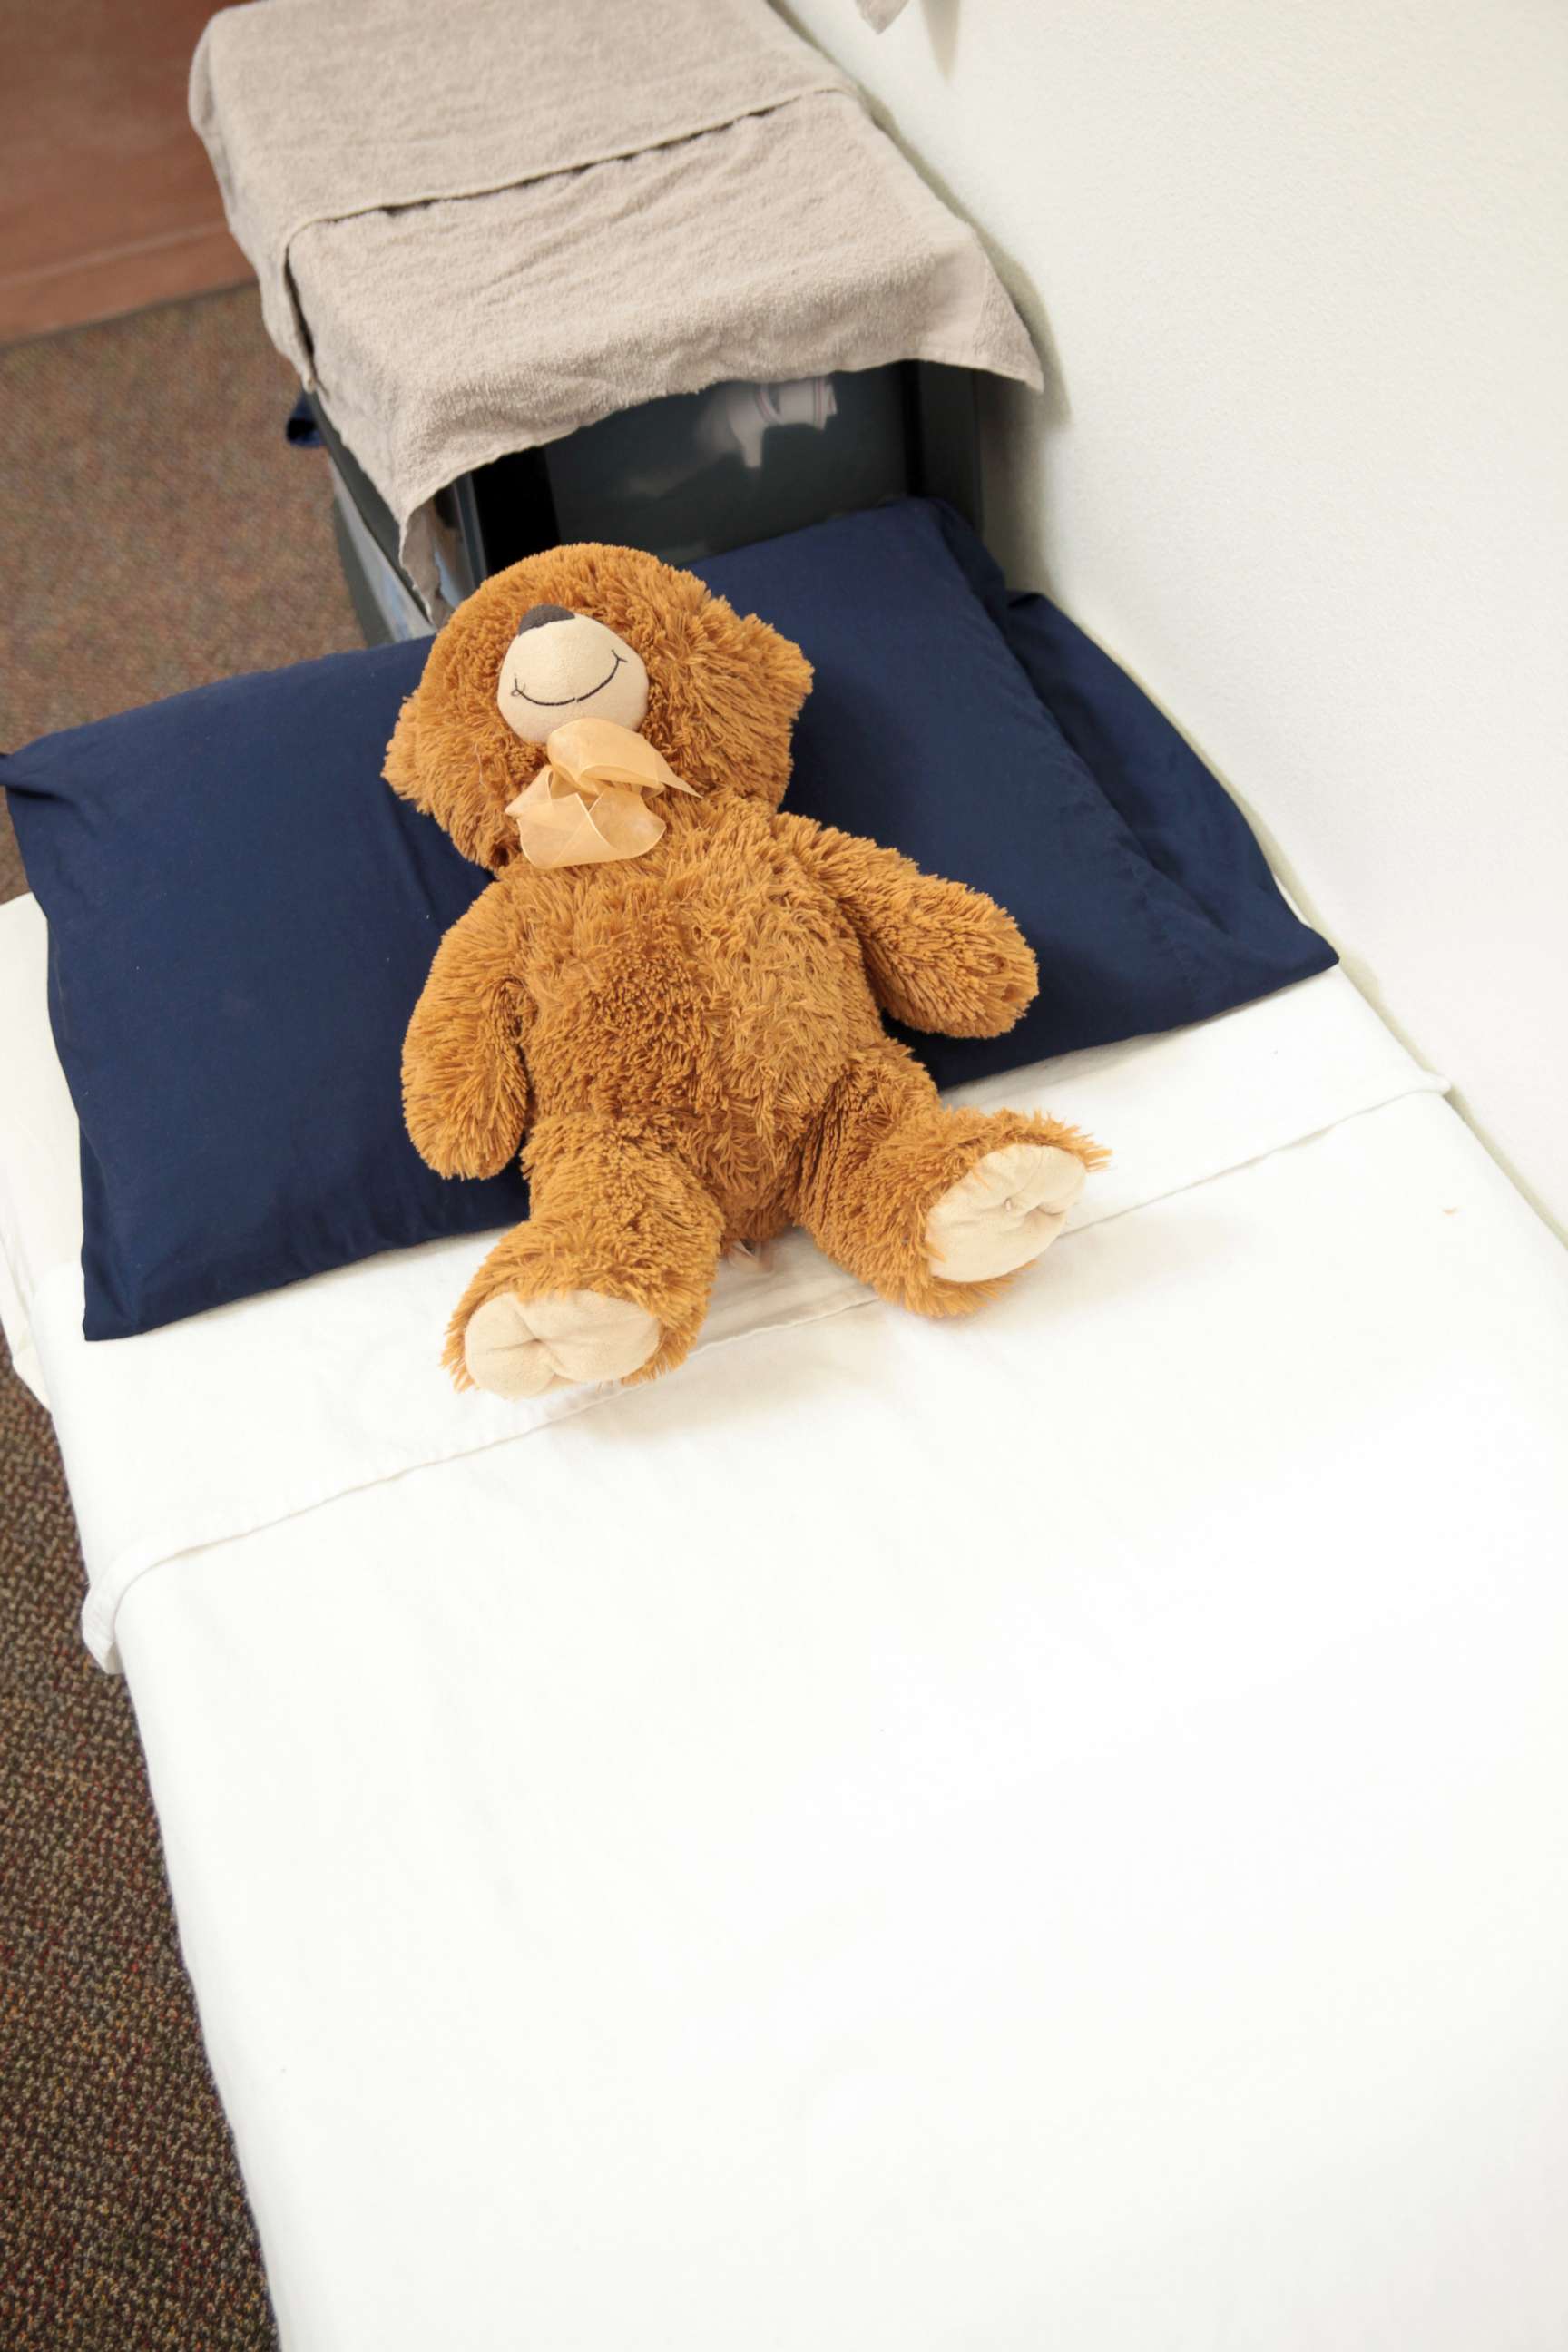 PHOTO: A teddy bear on a bed of a Walmart-turned-shelter that houses almost 1,500 undocumented children.